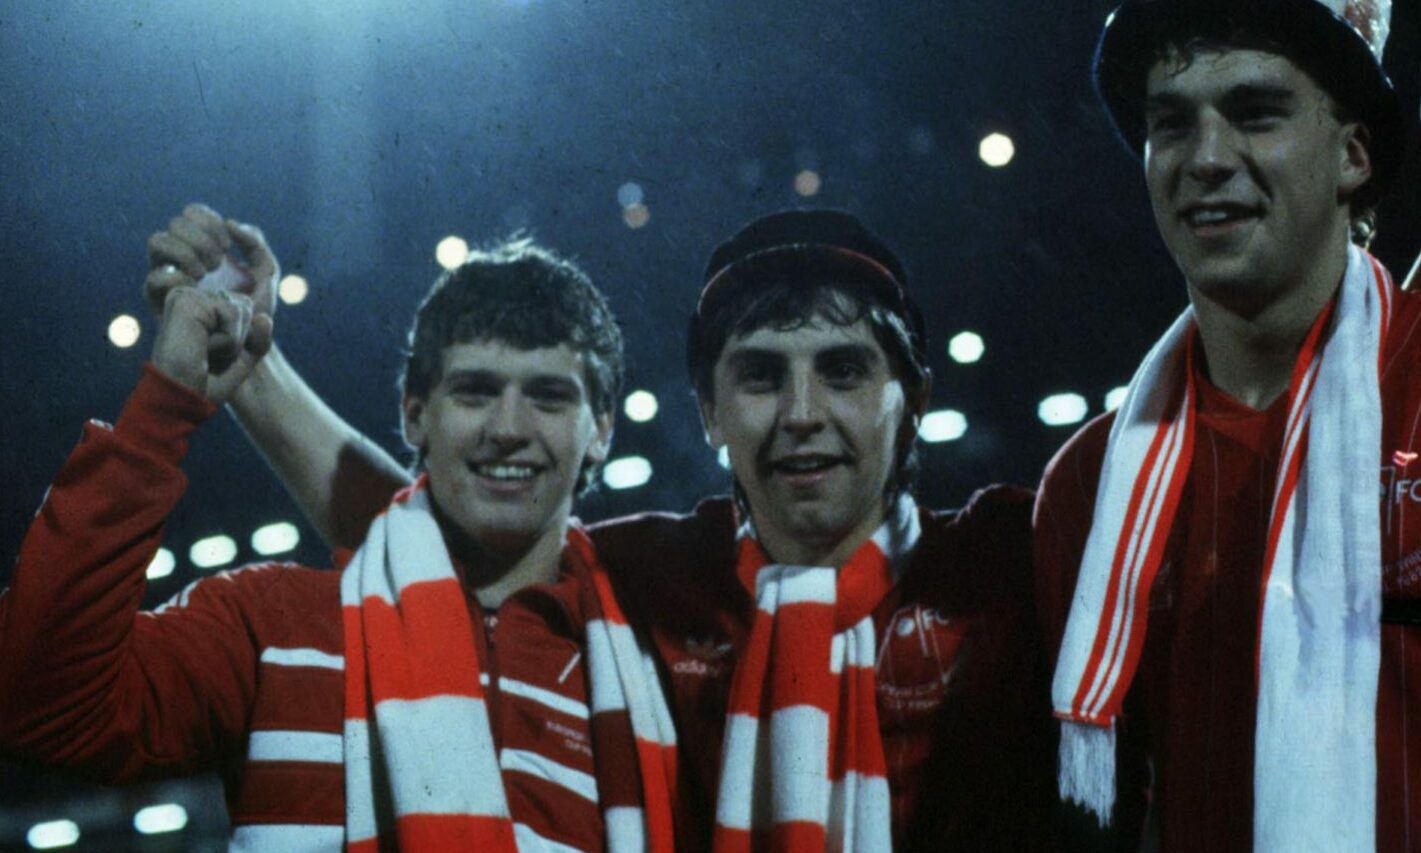 Aberdeen players Eric Black (left), John Hewitt and Neale Cooper (right) celebrate after the final whistle. Image: SNS.